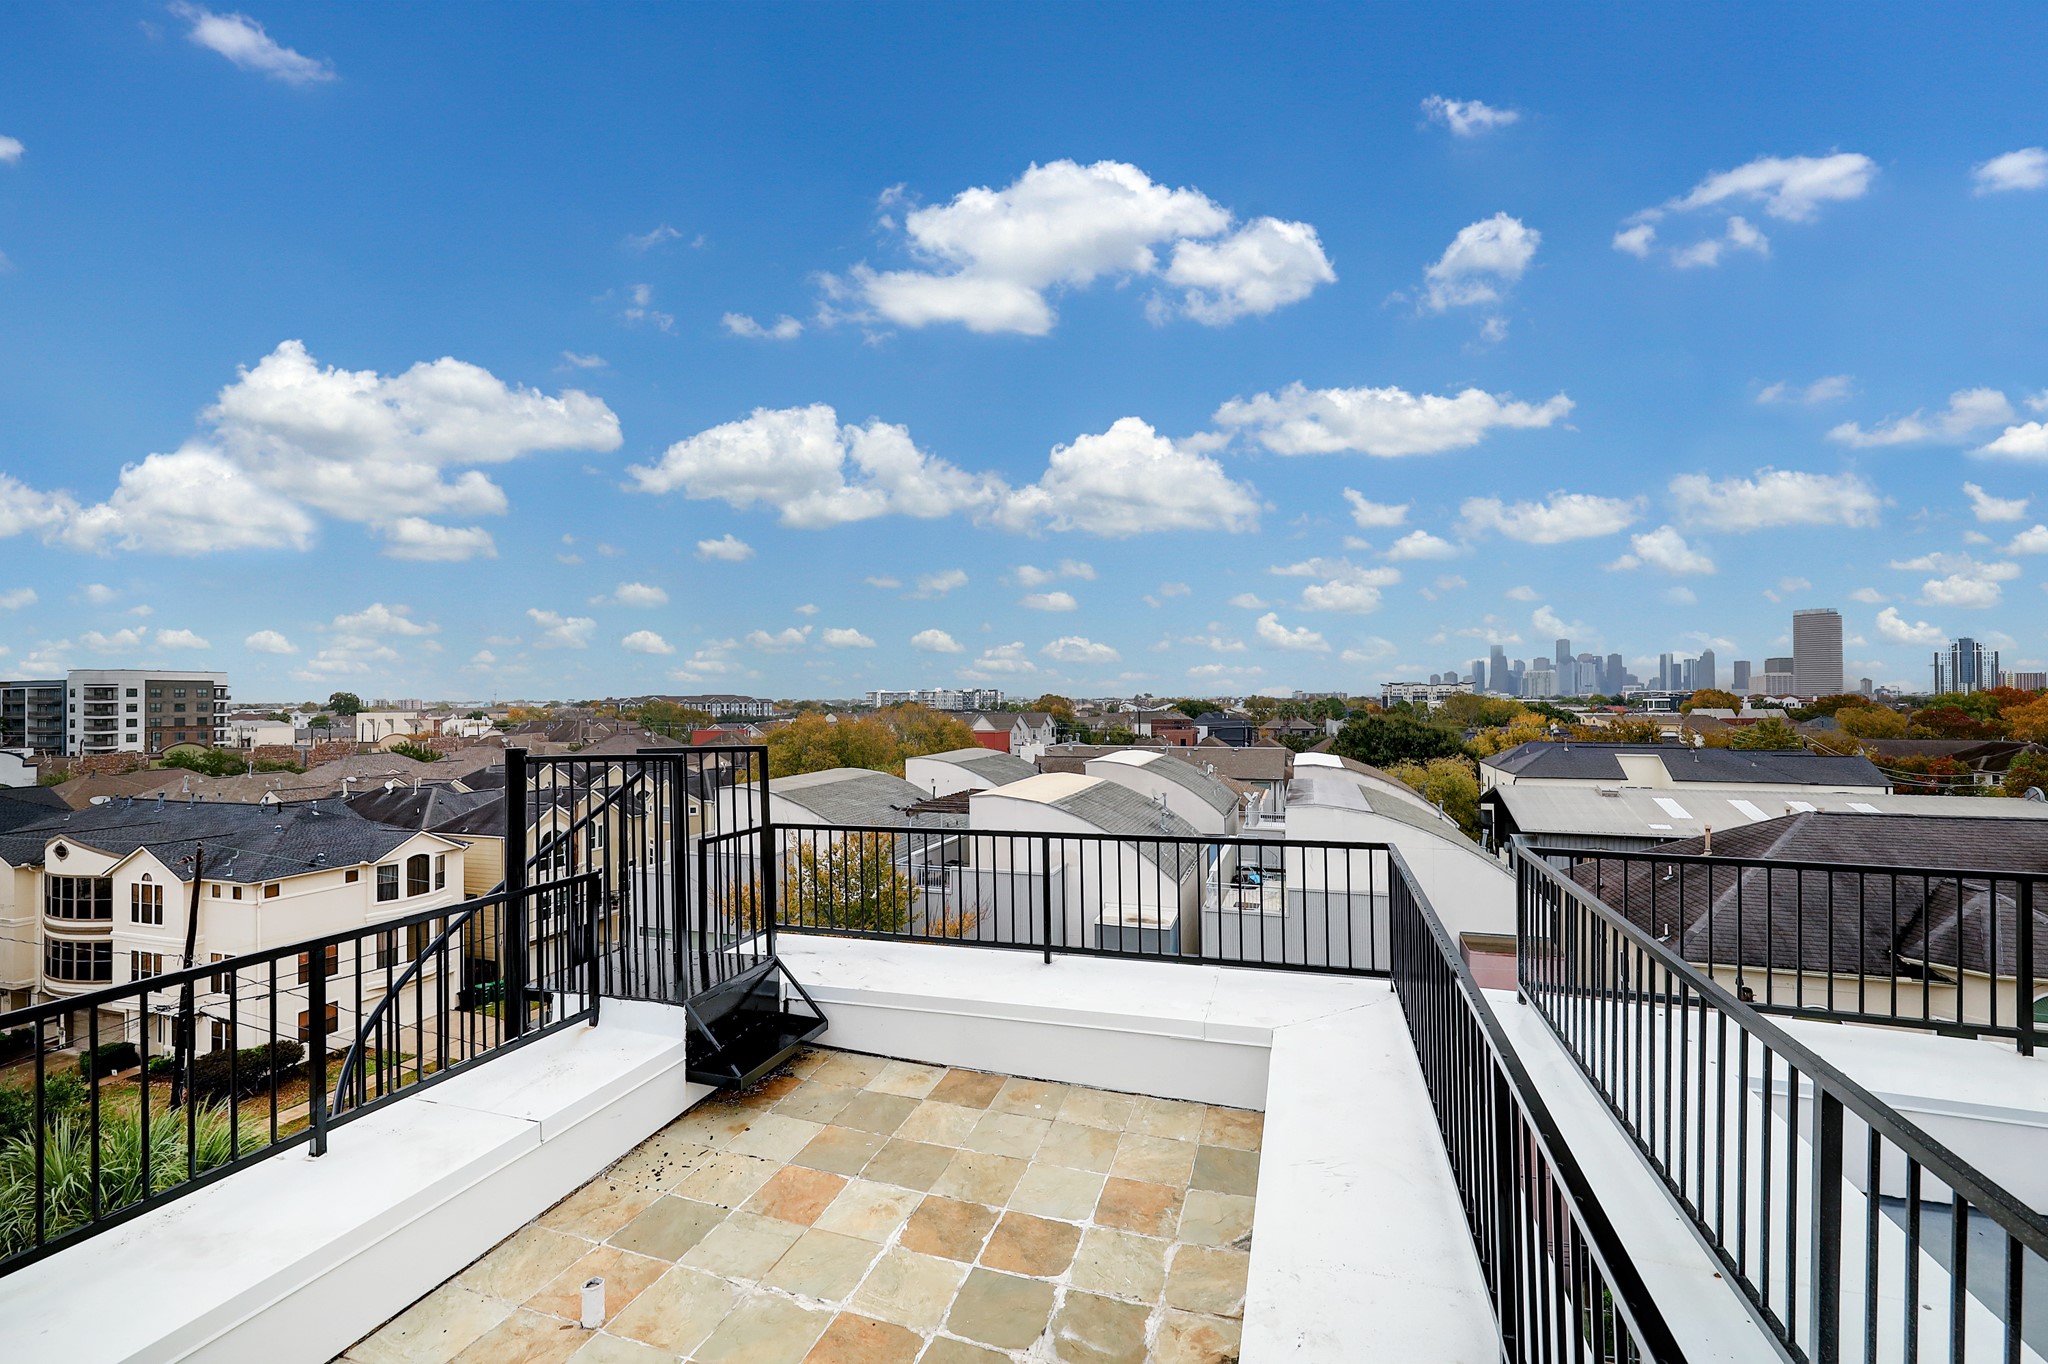 This view can be yours! Schedule an appointment to see 719 Reinicke St!